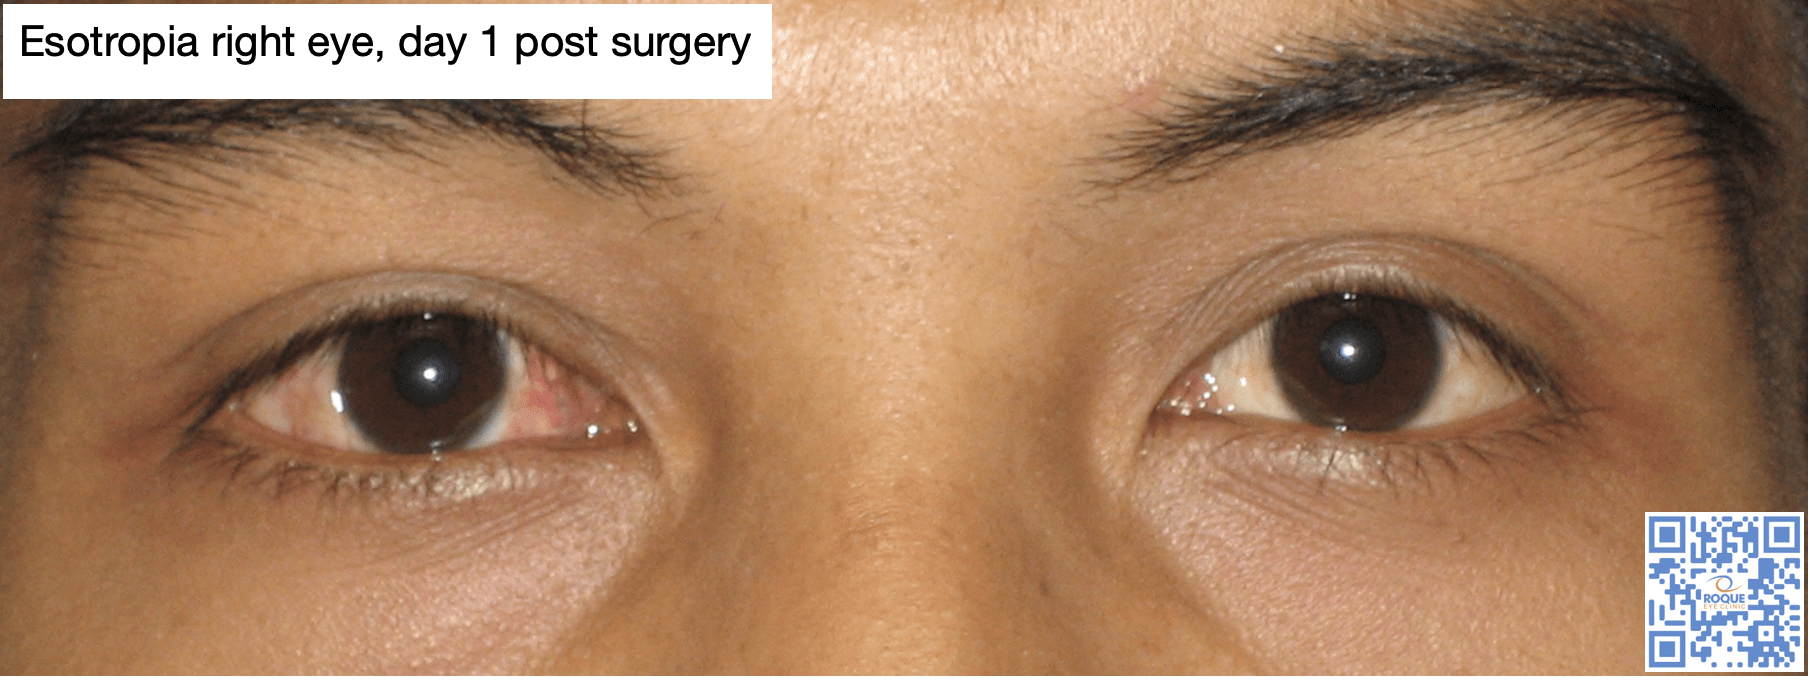 STRABISMUS SURGERY - ROQUE Eye Clinic 